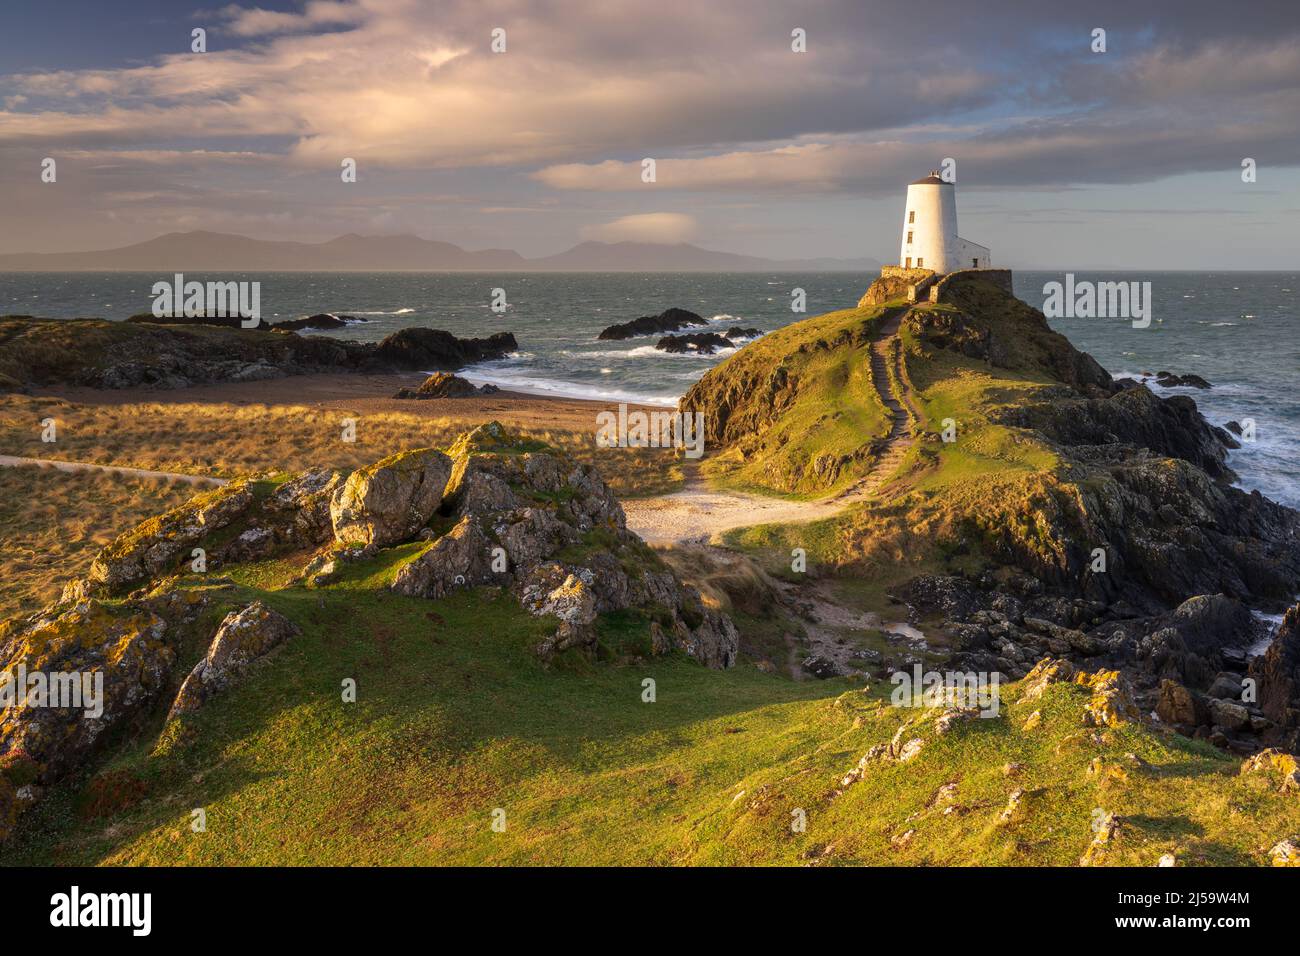 Twr Mawr Lighthouse glows as the first direct light of the rising sun bathes the coastal scene on Ynys Llanddwyn in golden light on a spring morning. Stock Photo